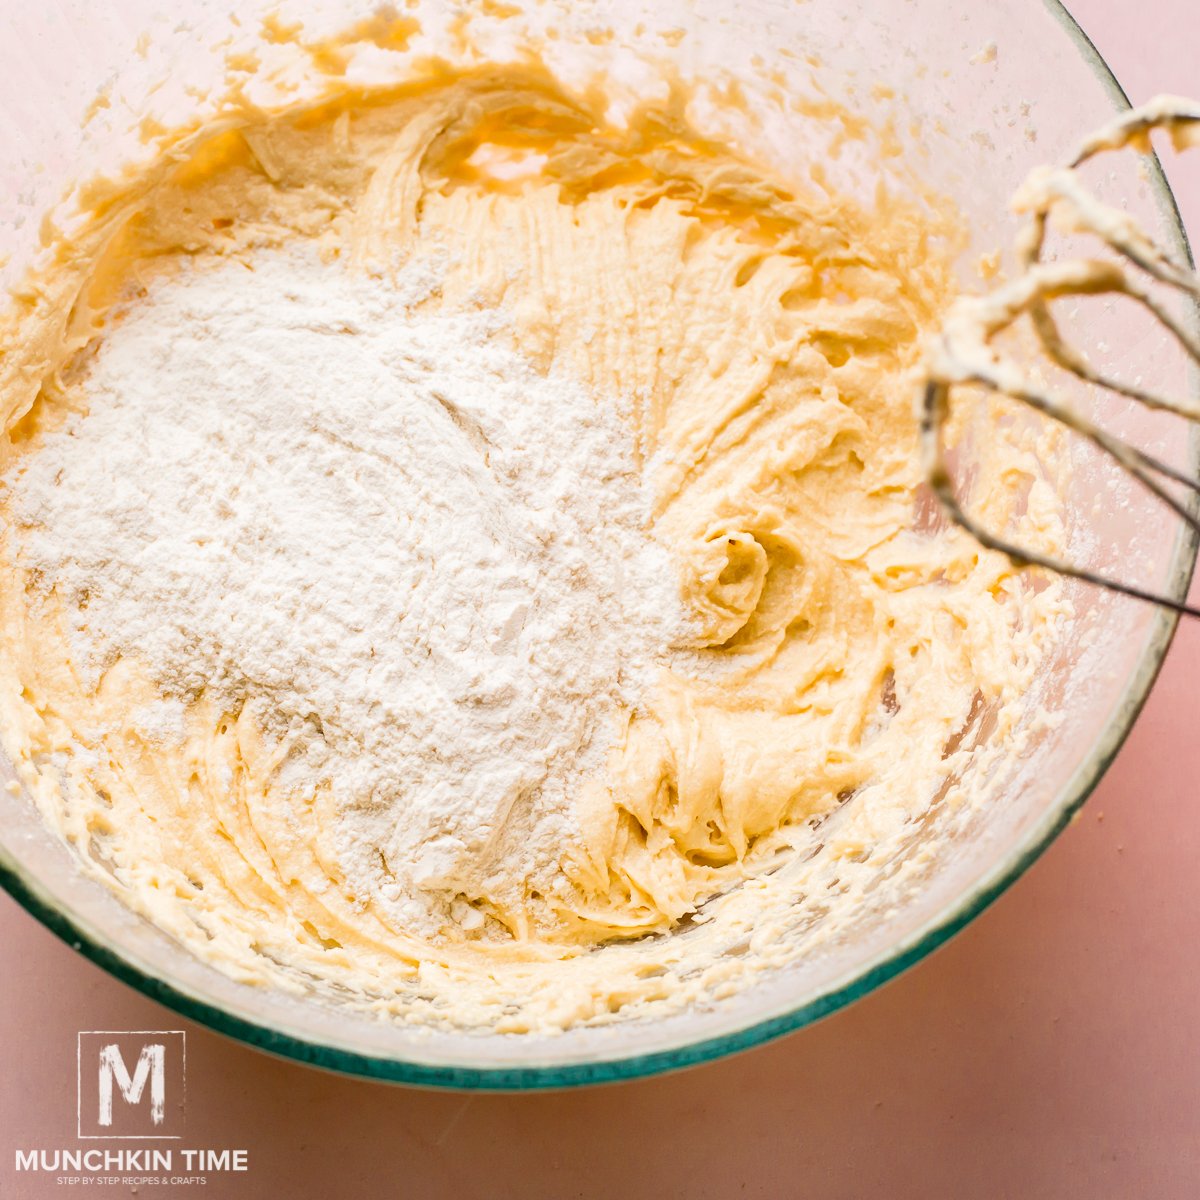 Add flour to the batter 1 cup at a time.